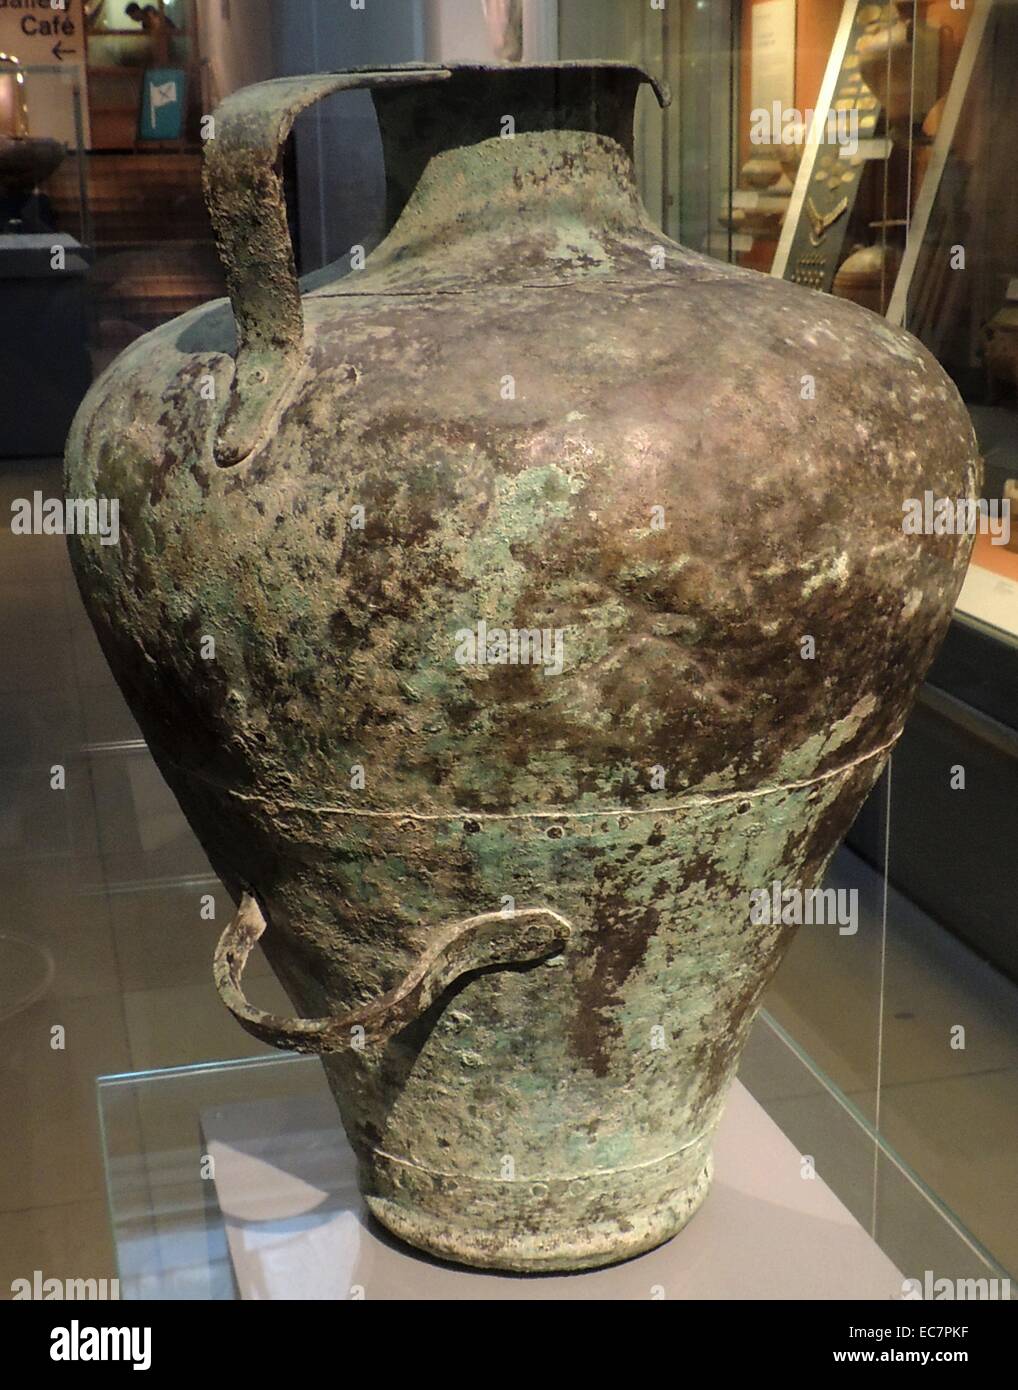 Copper pitcher.  Mycenaean, 1500-1300 BC - probably from the Peloponnese.  The pitcher was made from four sheets of copper, hammered to shape and riveted together.  It is a remarkably well-preserved example of a type of vessel which was fairly common, but rarely survived intact. Stock Photo